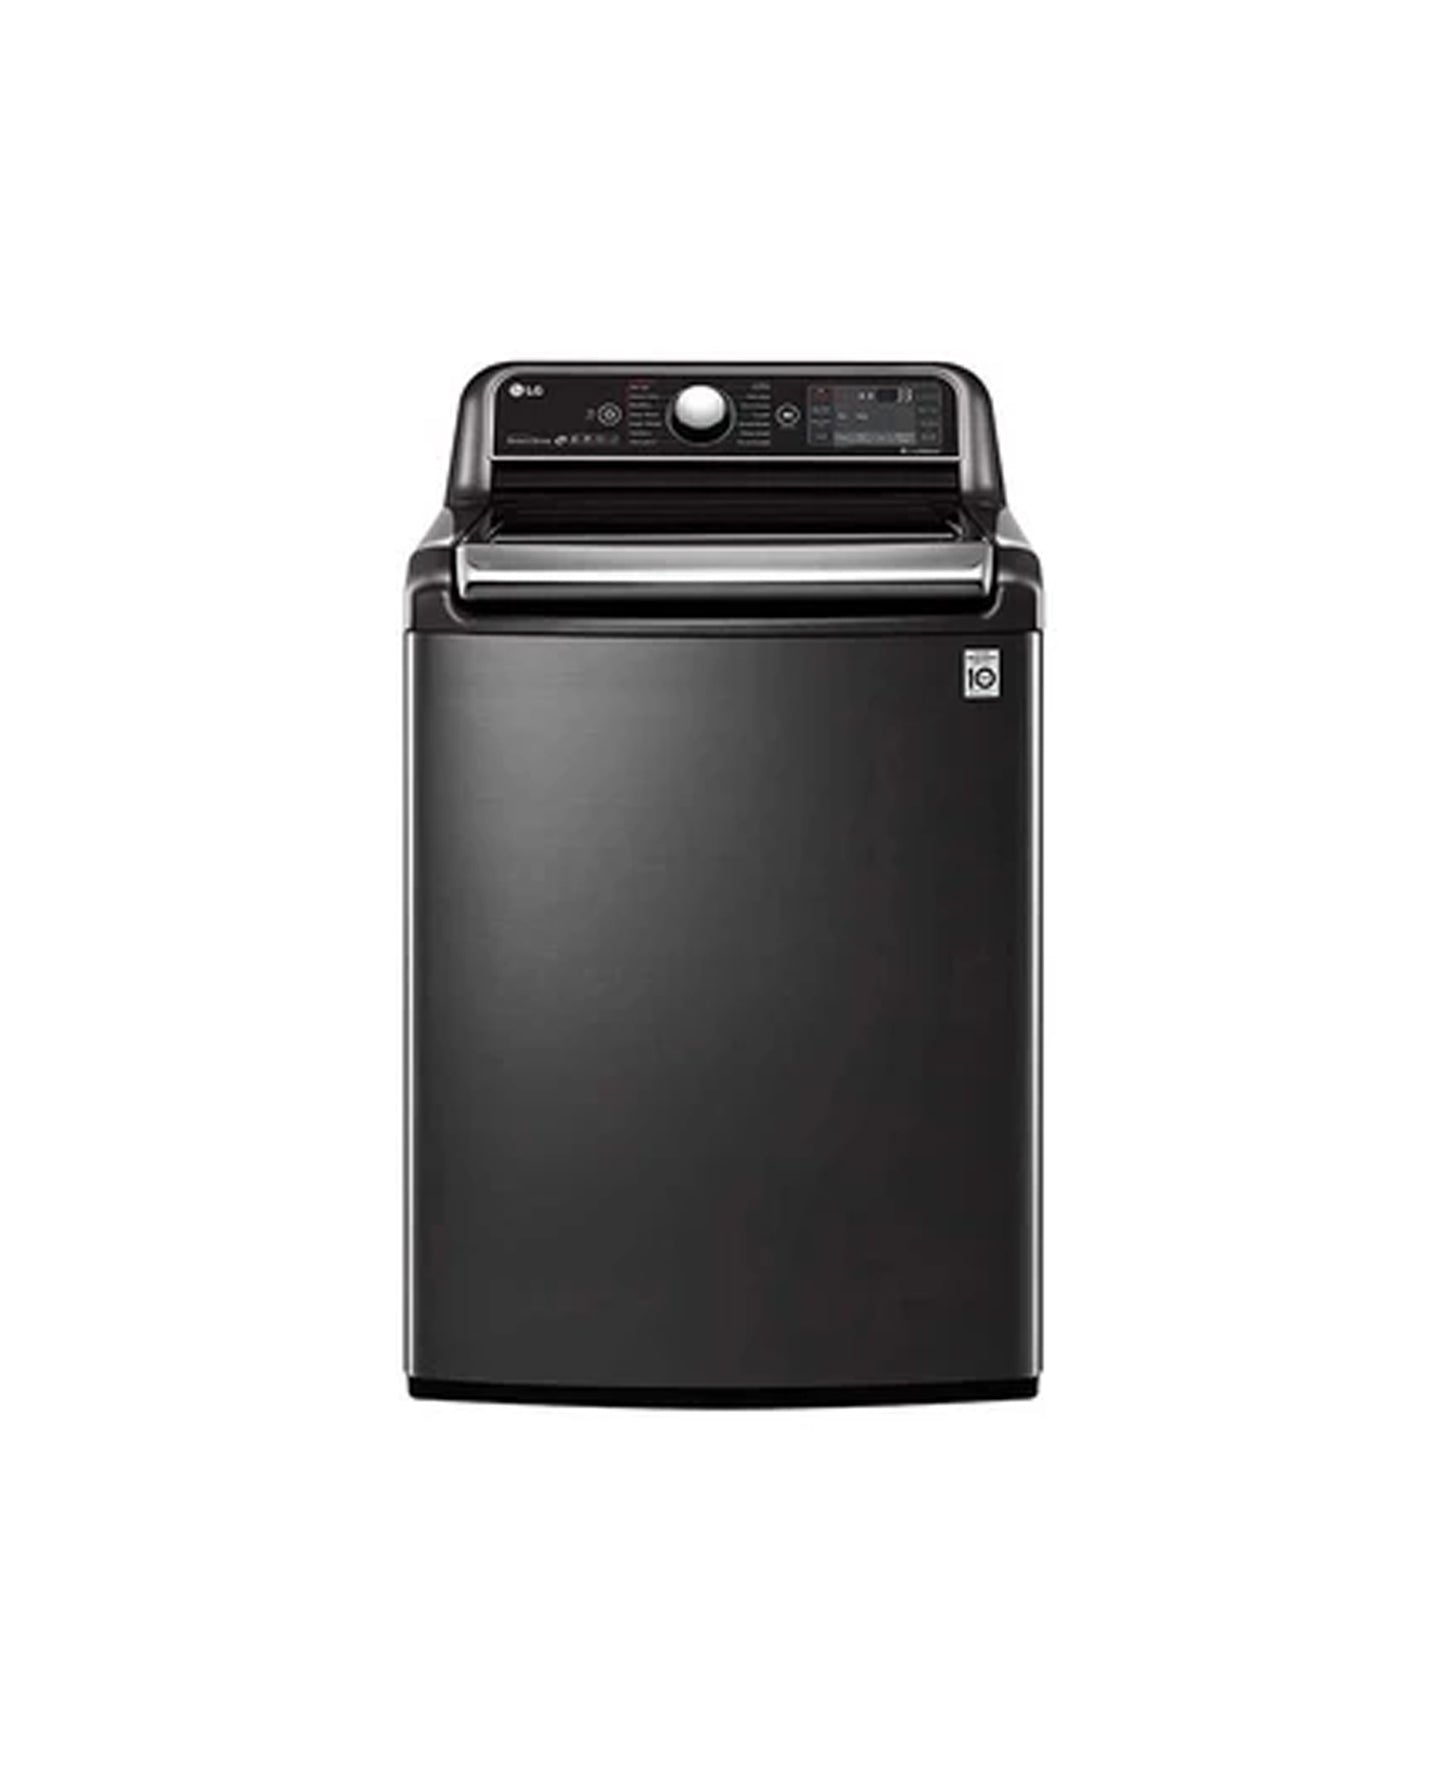 LG 24KG Top Load Washing Machine with Direct Drive & 6 Motion technology